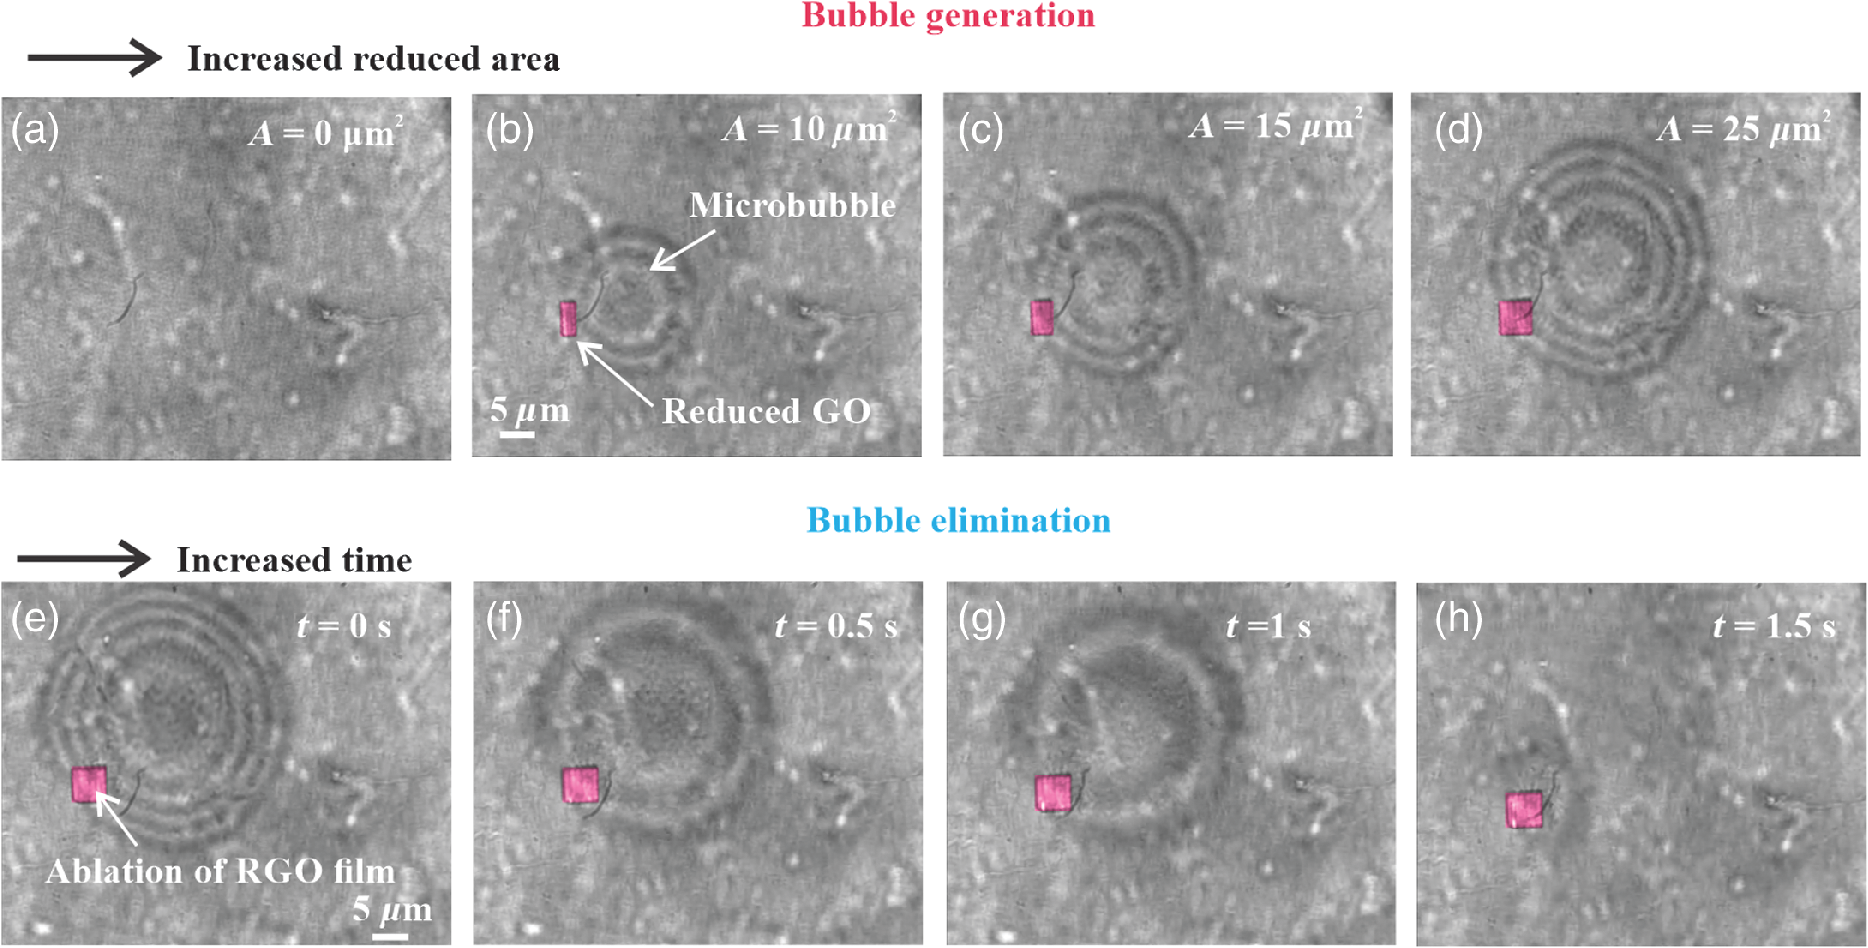 process of the microbubble generation and elimination